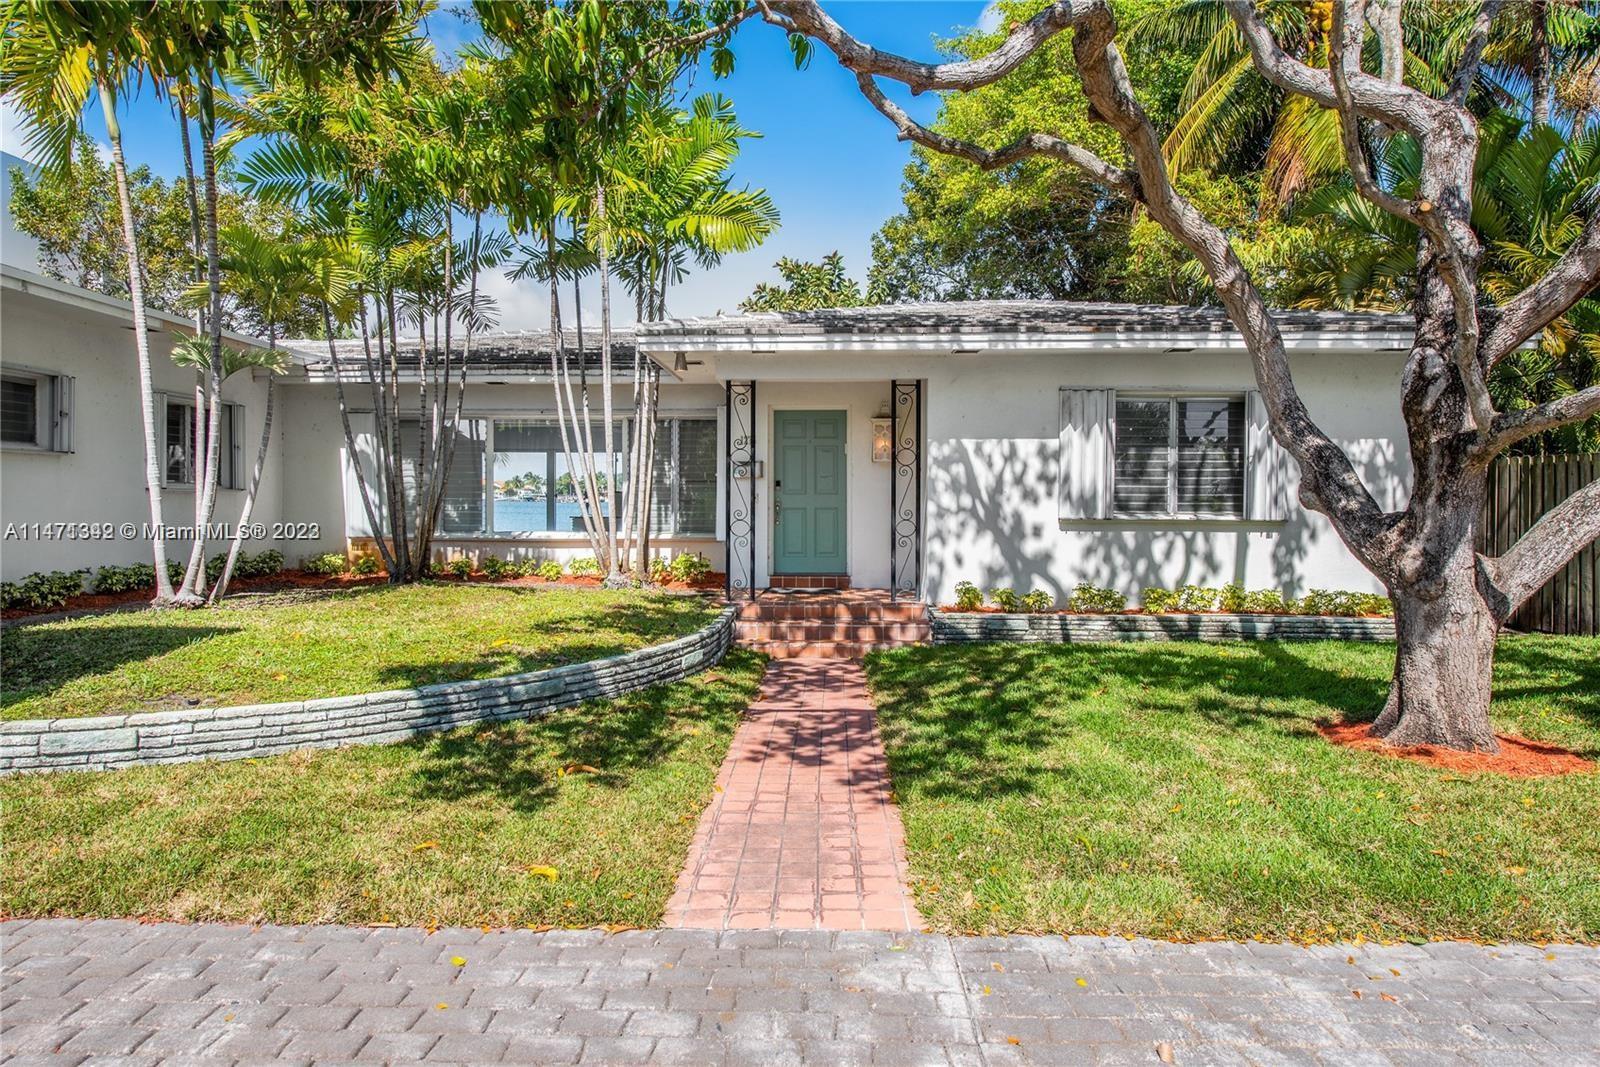 Rental Property at 1275 N Biscayne Point Rd, Miami Beach, Miami-Dade County, Florida - Bedrooms: 4 
Bathrooms: 3  - $12,500 MO.